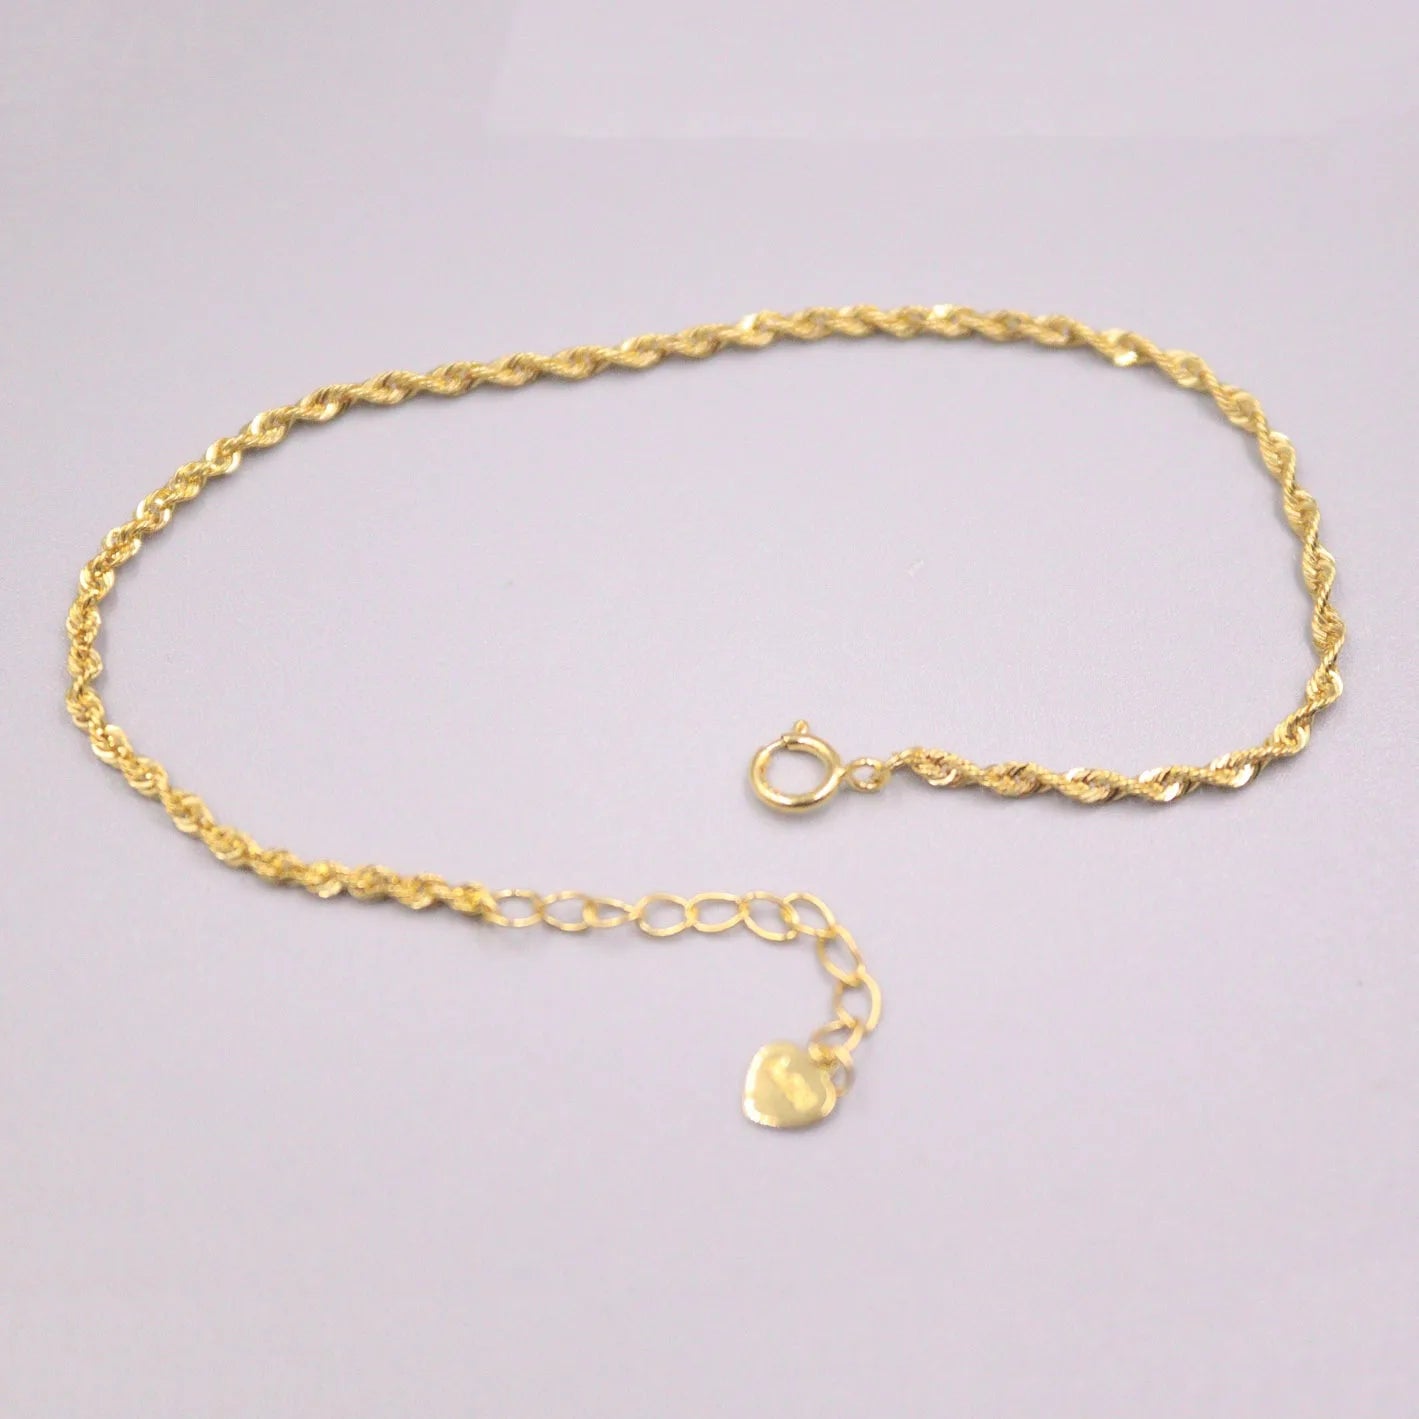 Au750 Real 18K Yellow Gold Bracelet For Women 1.8mm Twist Rope Link Chain 18cm Extender